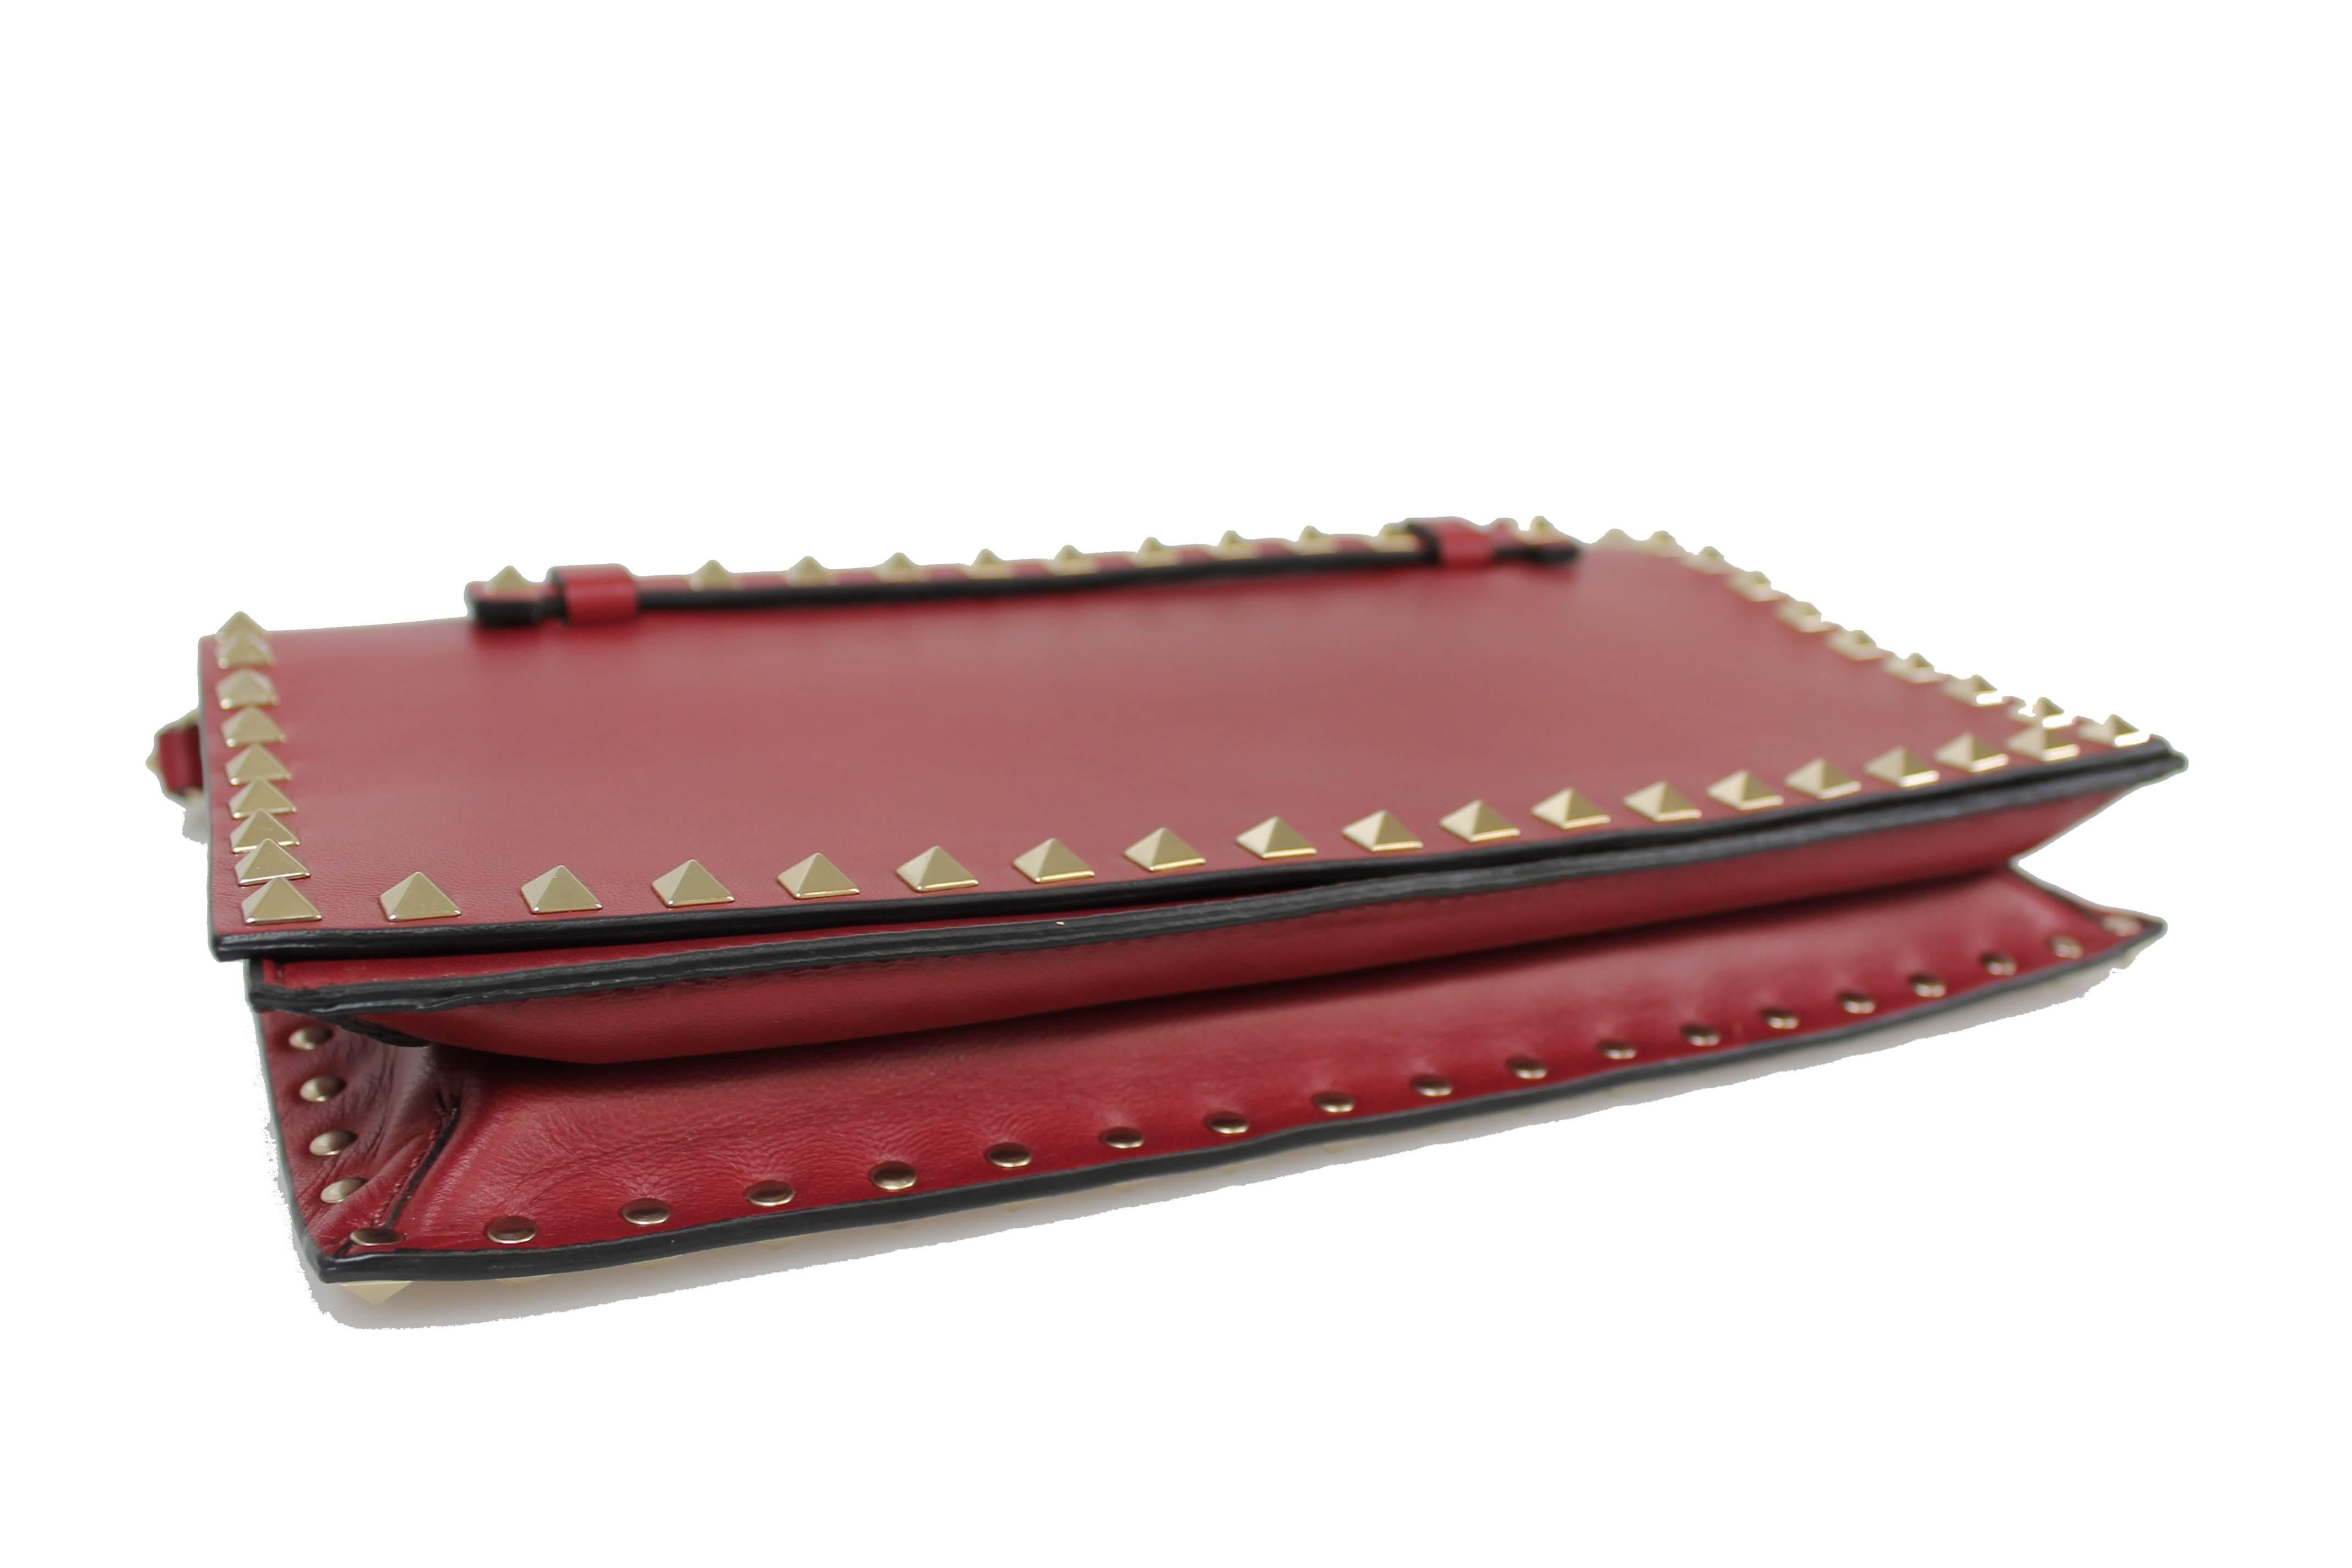 VALENTINO Rockstud Leather Red Clutch In Excellent Condition For Sale In Miami, FL